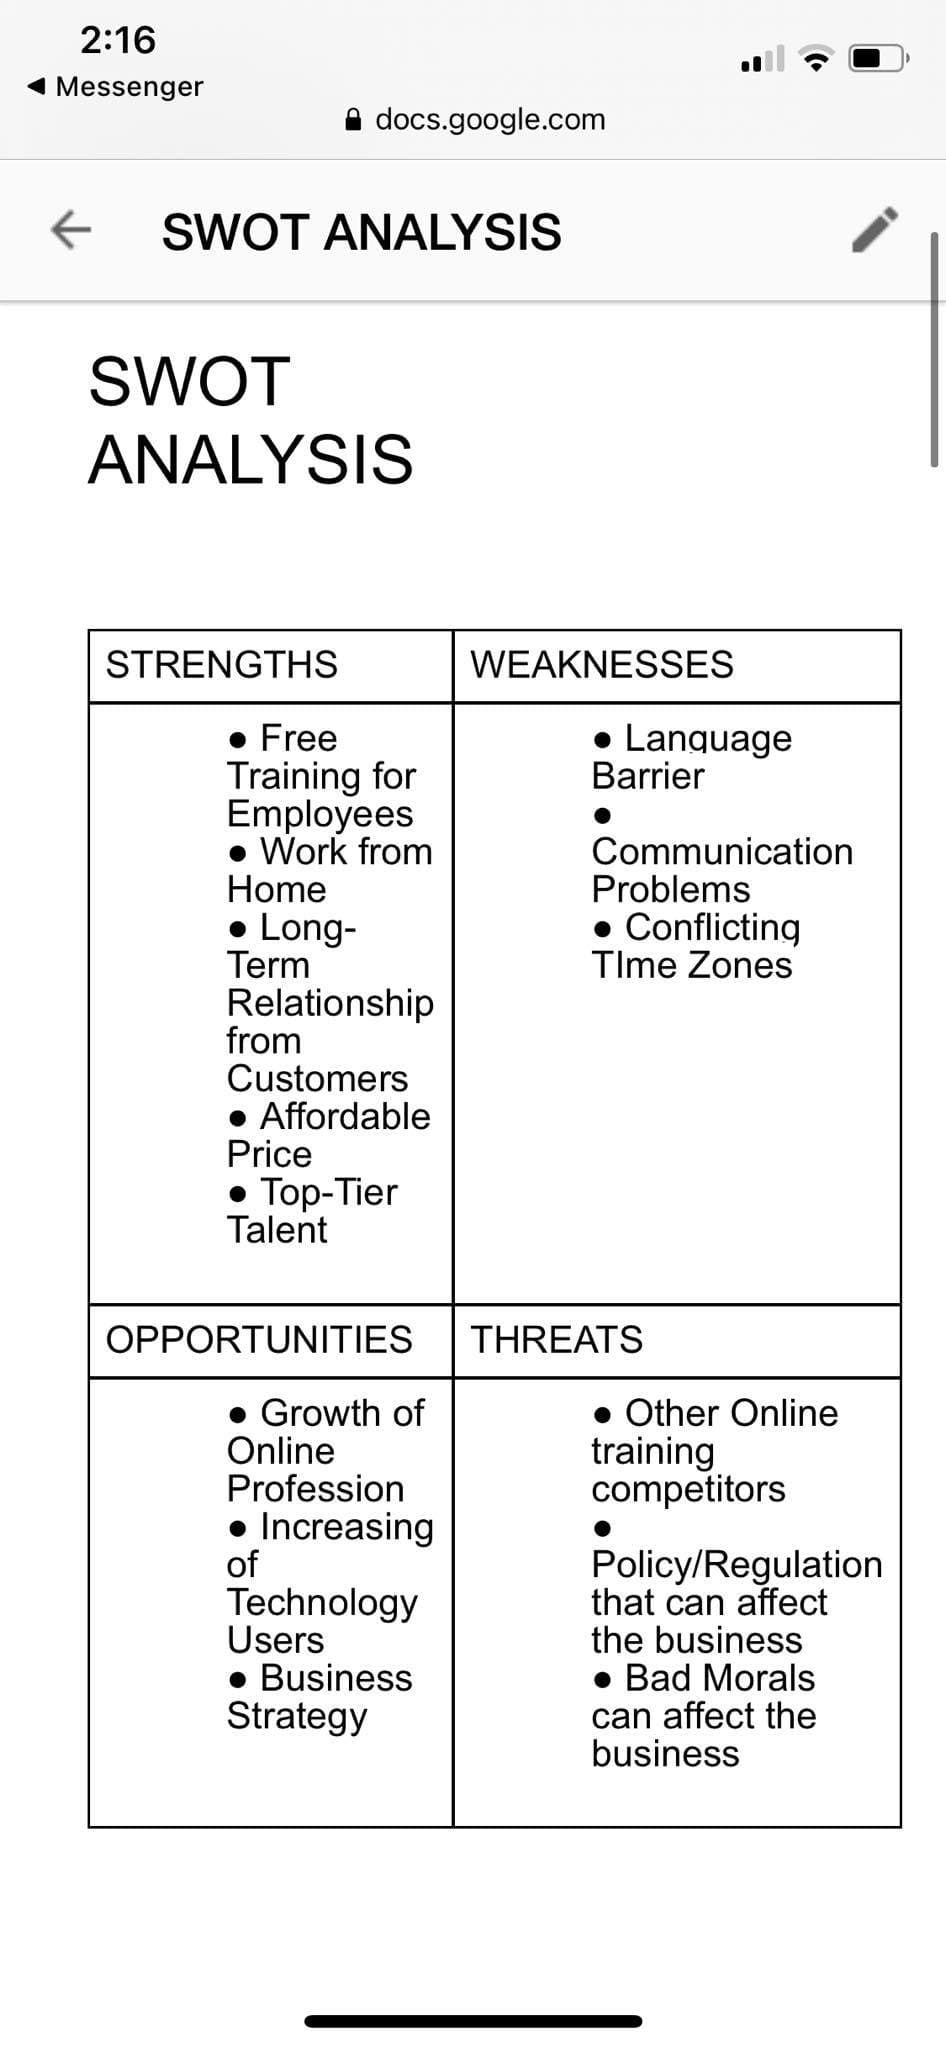 2:16
1 Messenger
A docs.google.com
SWOT ANALYSIS
SWOT
ANALYSIS
STRENGTHS
WEAKNESSES
• Lanquage
Barrier
• Free
Training for
Employees
• Work from
Home
• Long-
Term
Relationship
from
Customers
• Affordable
Price
Communication
Problems
• Conflicting
TIme Zones
• Top-Tier
Talent
OPPORTUNITIES
THREATS
Growth of
Online
Profession
• Other Online
training
competitors
• Increasing
of
Technology
Users
Business
Strategy
Policy/Regulation
that can affect
the business
Bad Morals
can affect the
business
